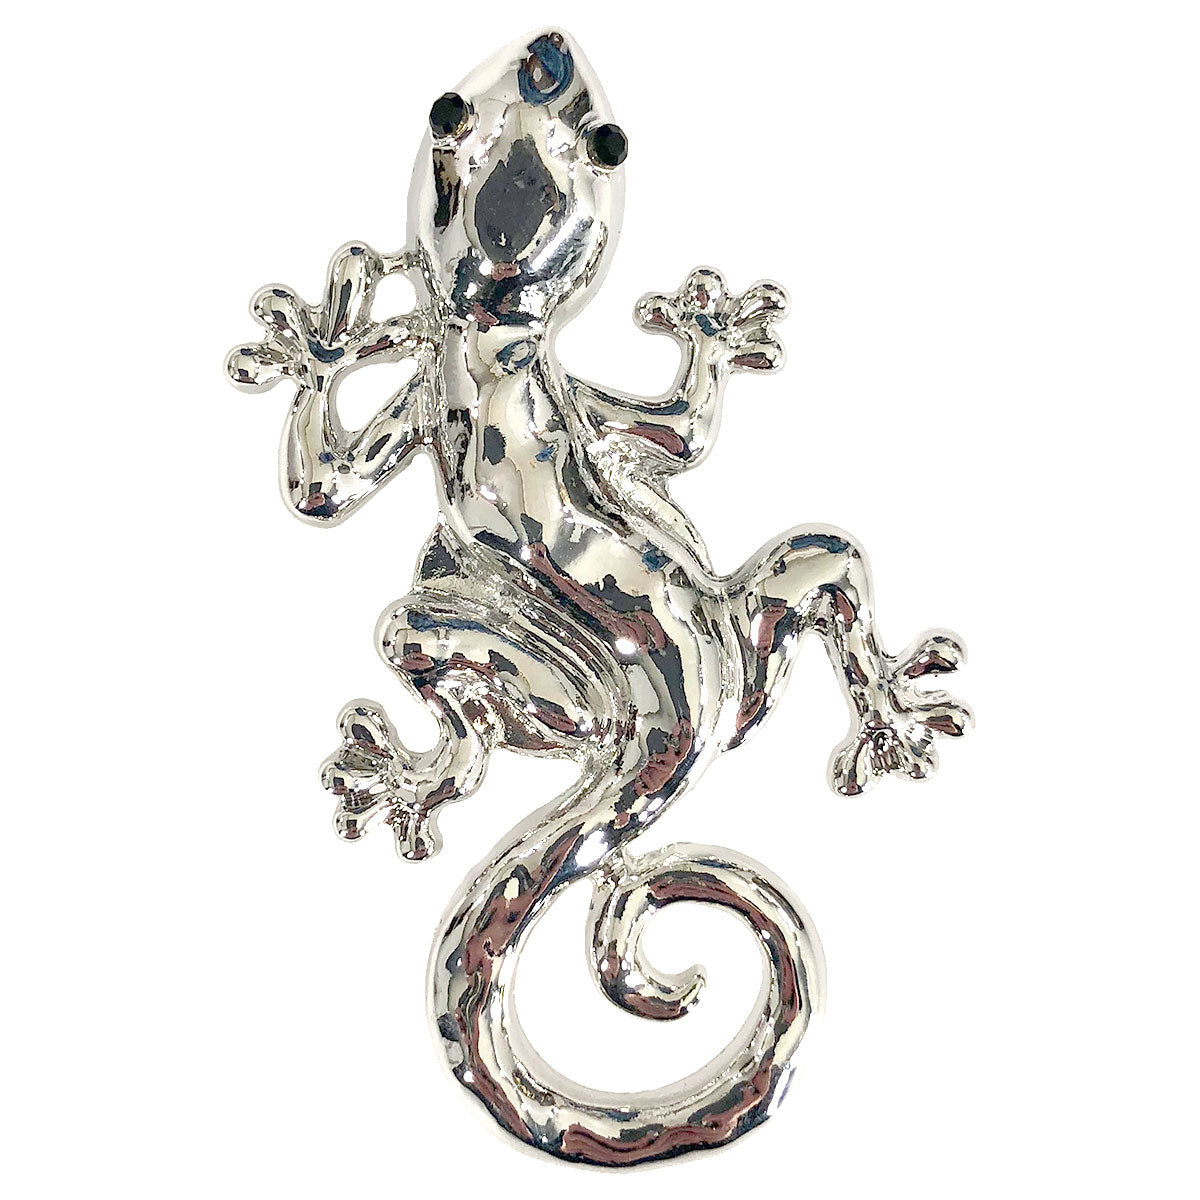 Silver gecko Magnetic Brooch for Scarves Artistic Sculptural shapes add a personality to absolutely anything you wish to put your stamp on! The Super Strong Magnet is enough for a jacket lapel! Use to hold a sarong or cardigan together.  Great to adorn a hat or to hold a scarf in place with Fabric Safe Magnet.